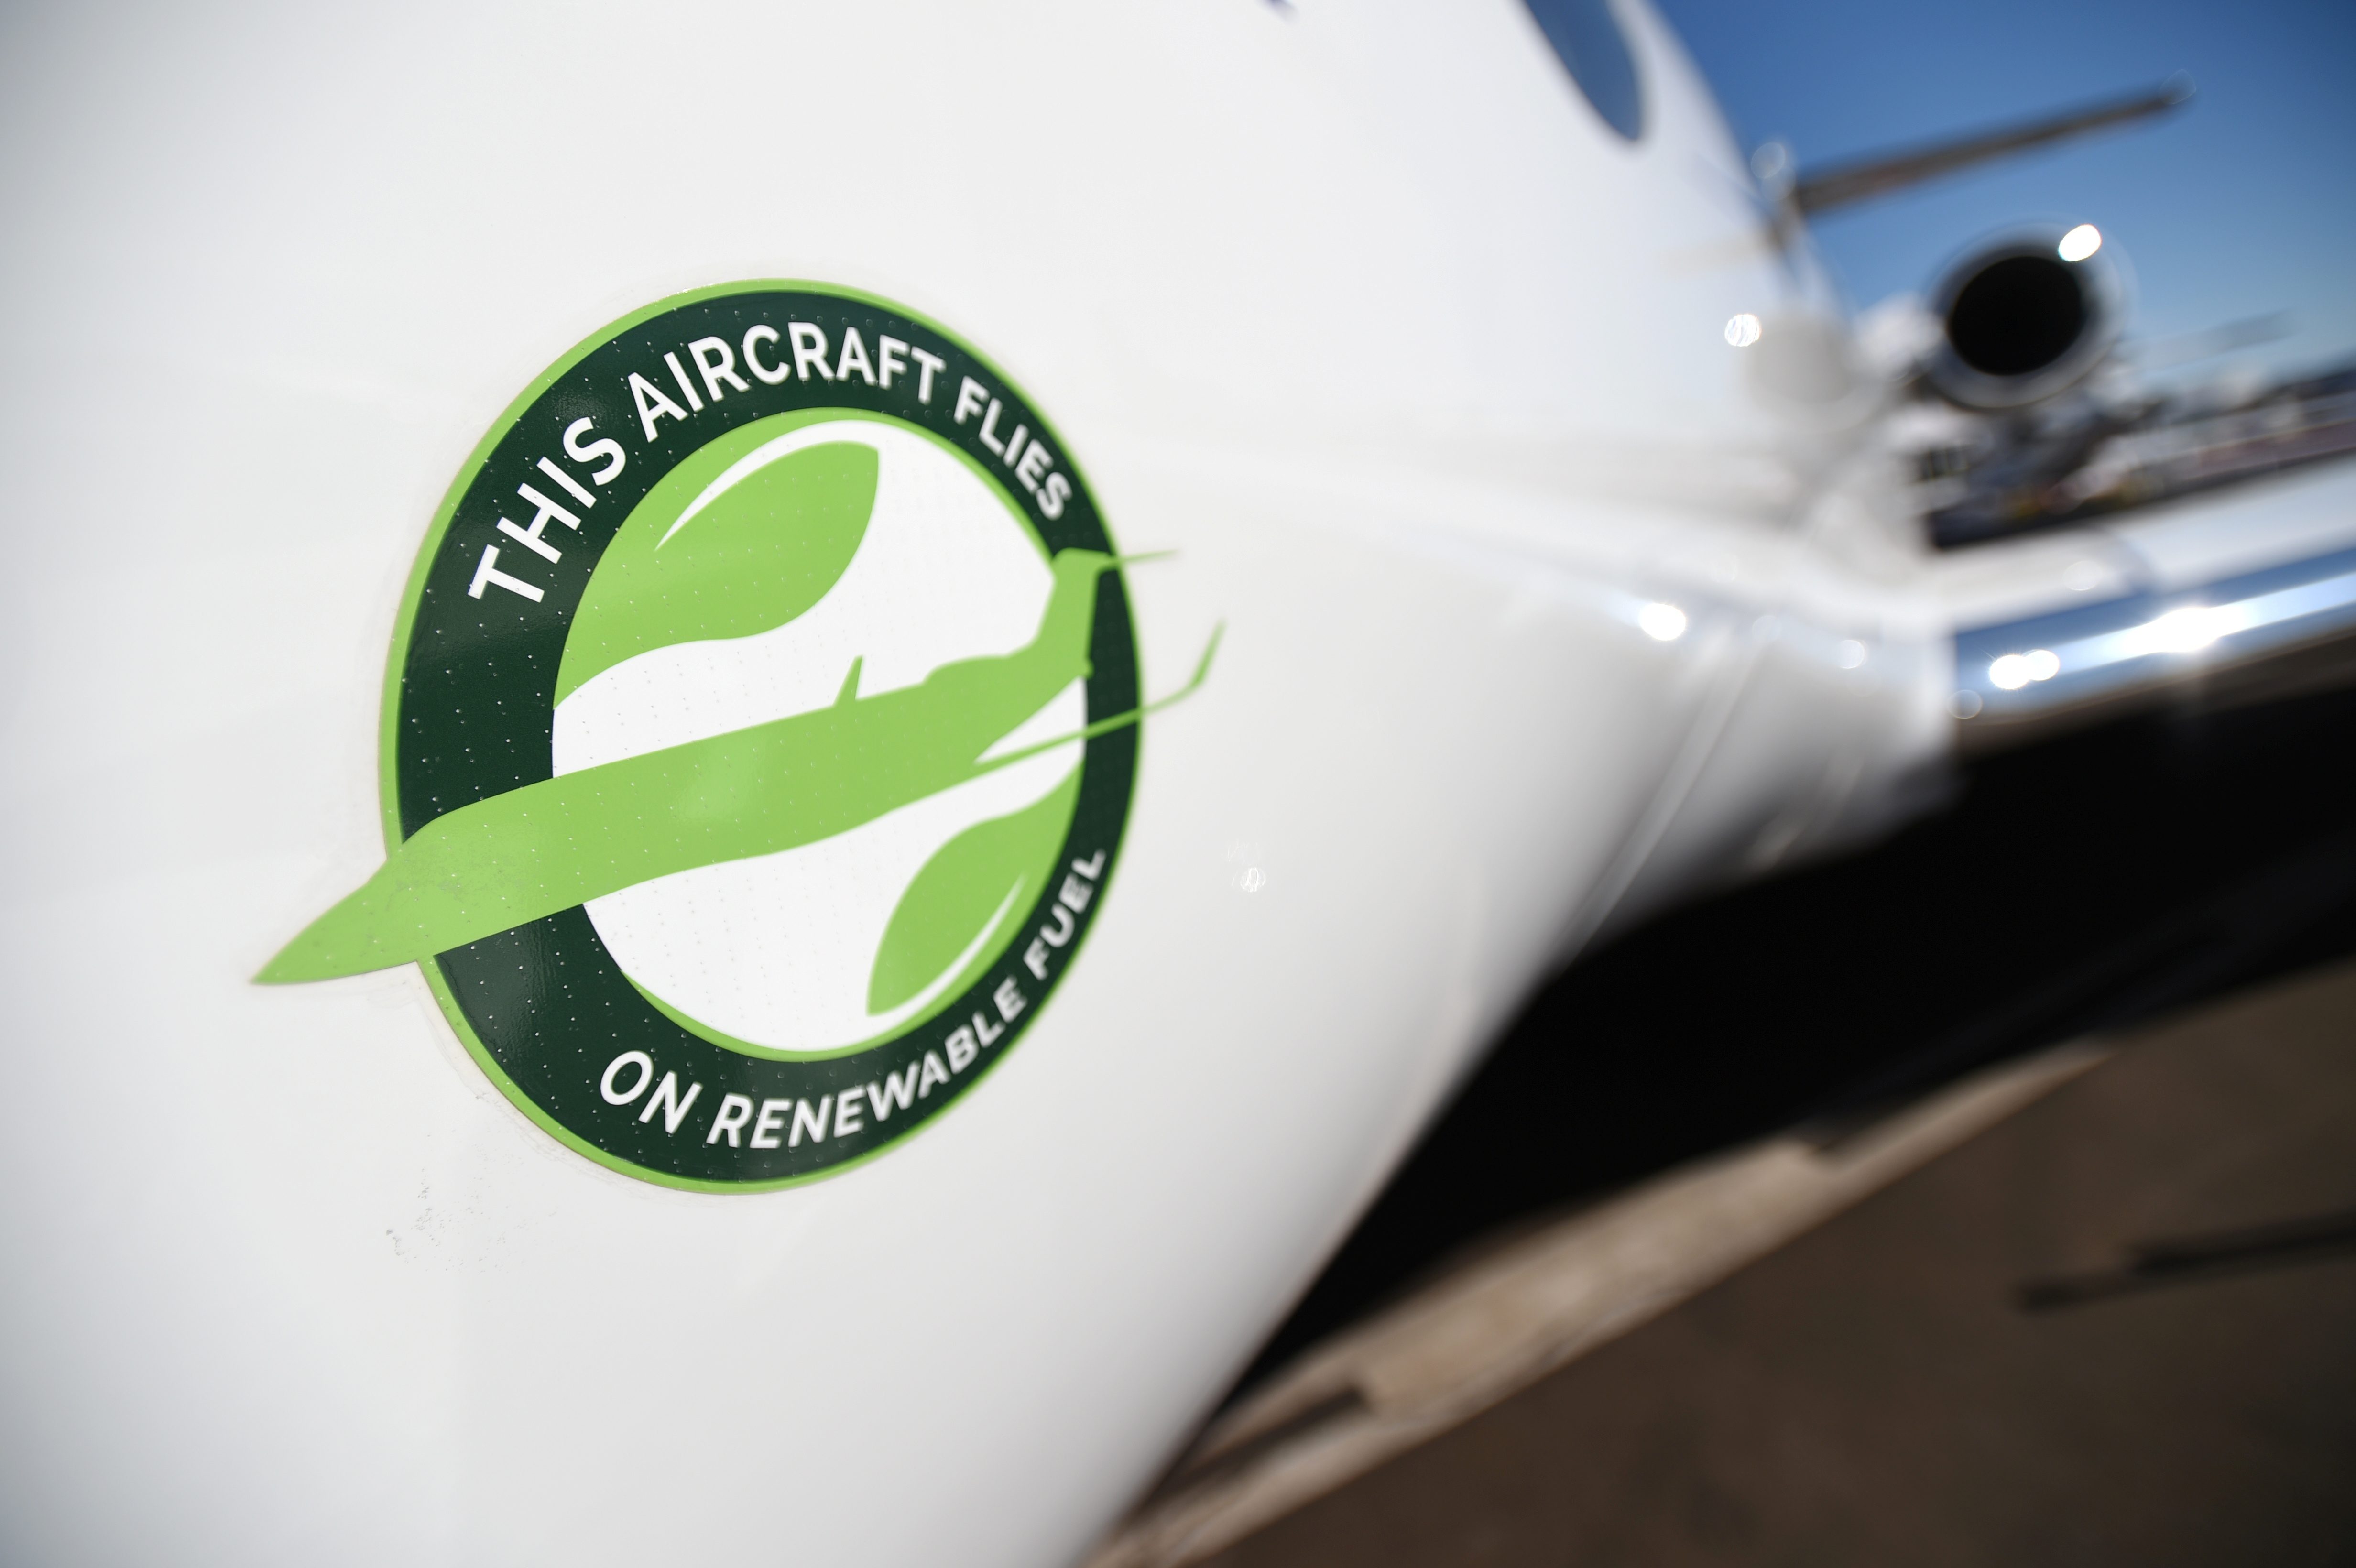 A decal stating "This Aircraft Flies On Renewable Fuel" is seen on on a Gulfstream 650ER business jet at the National Business Aviation Association (NBAA) exhibition in Las Vegas